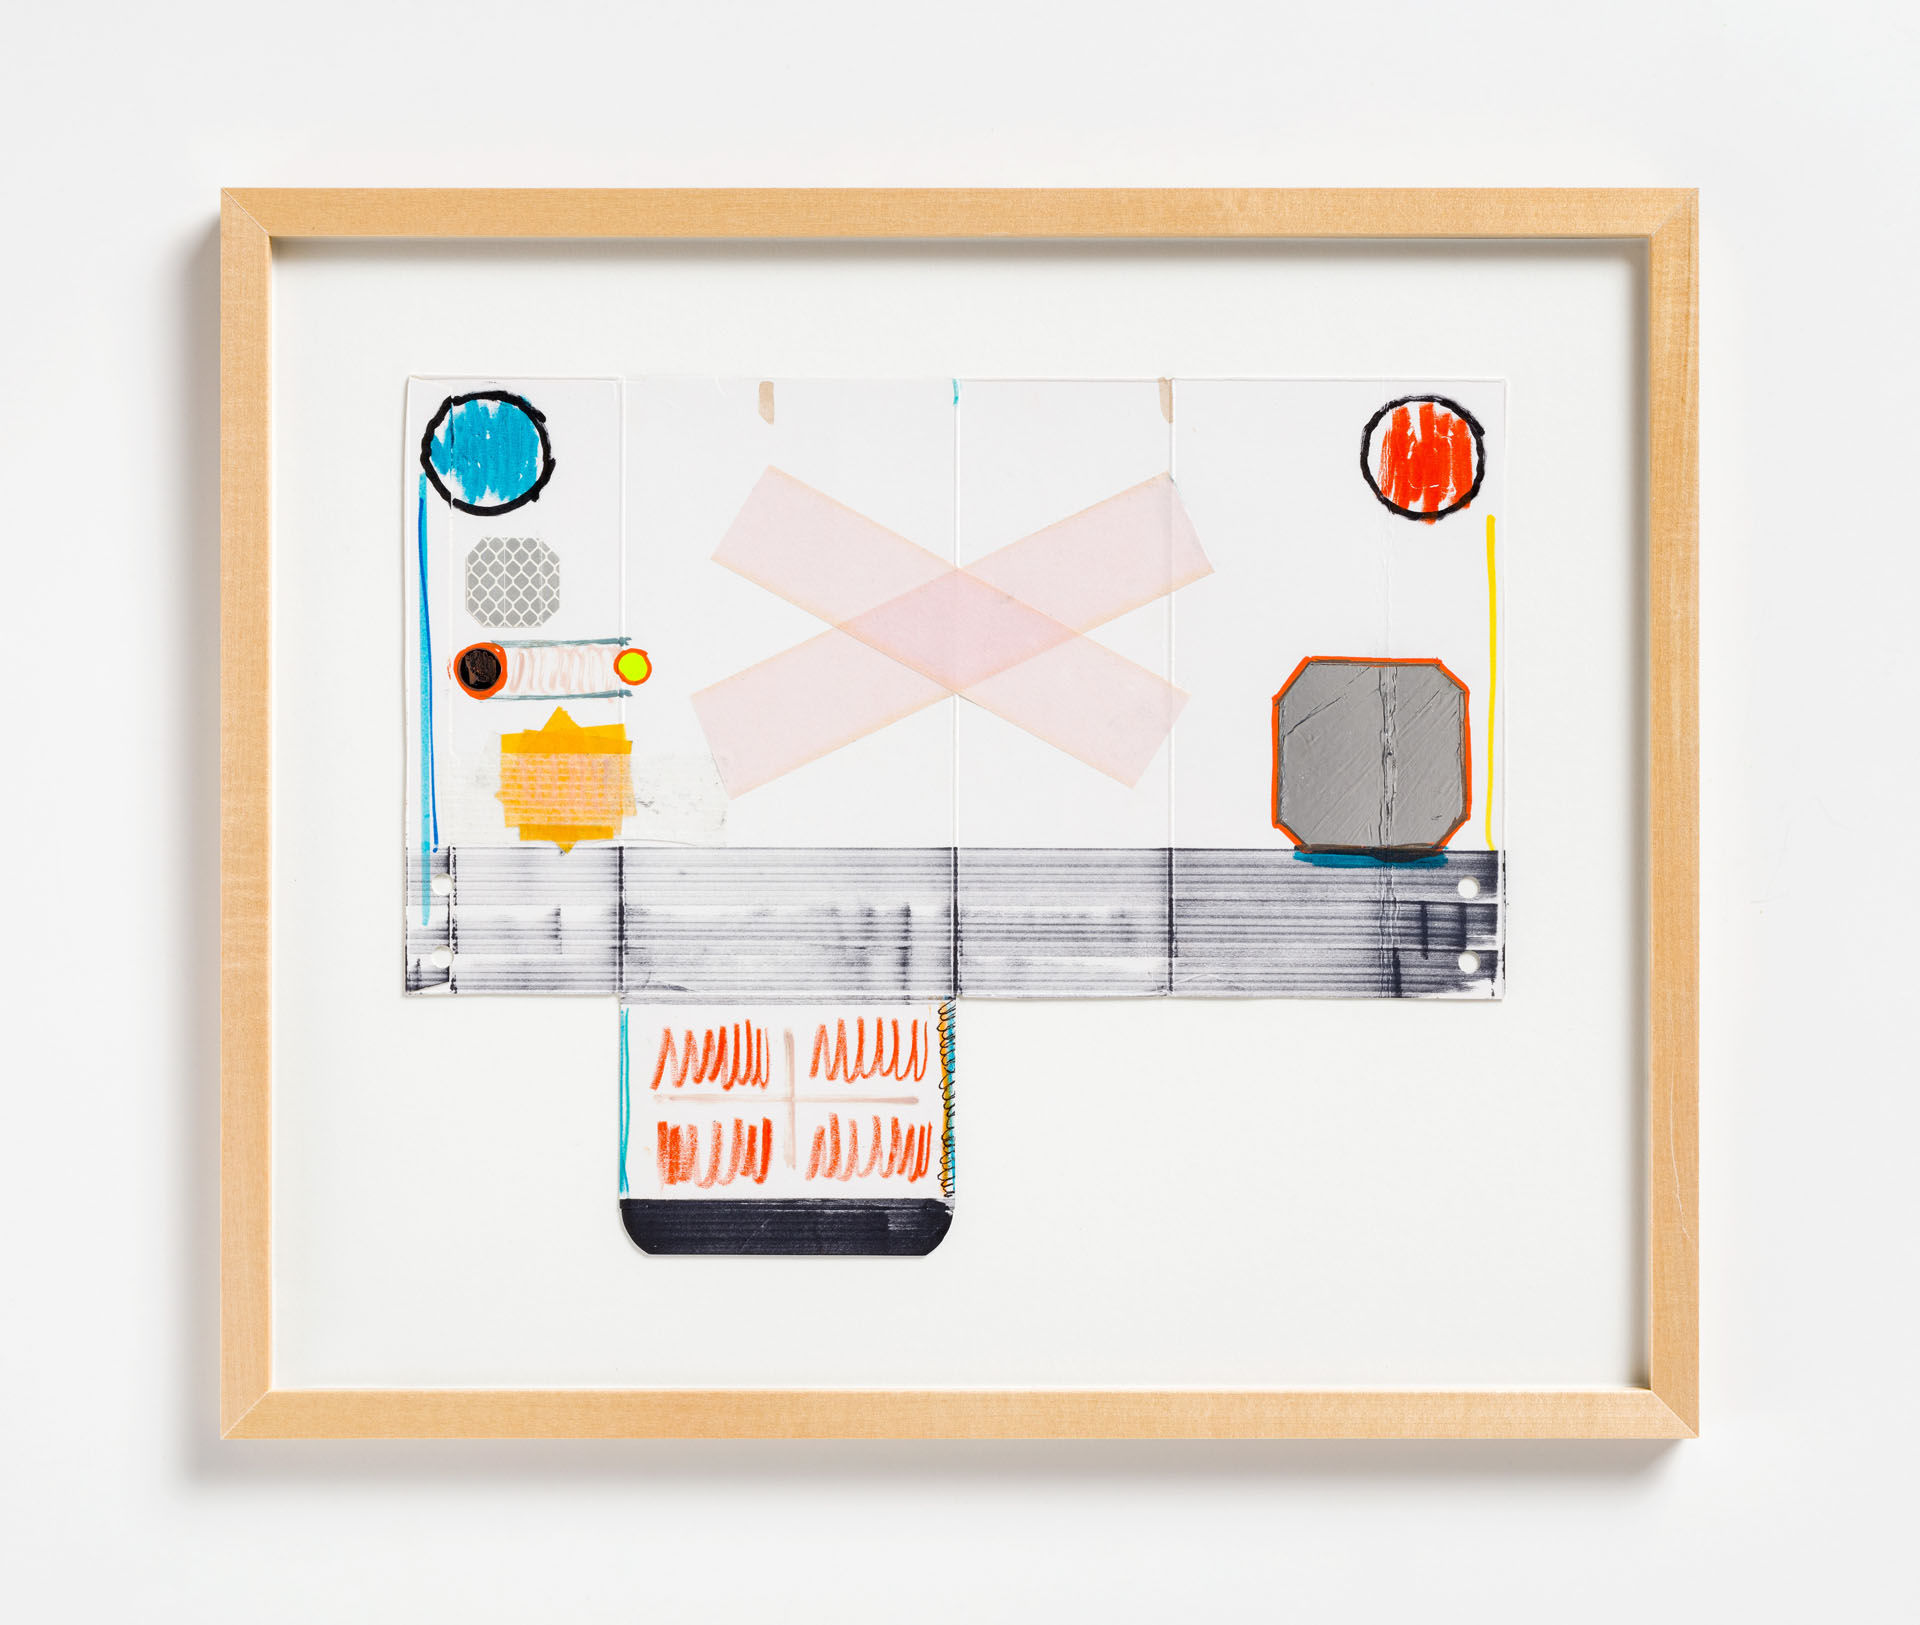 Ádám KOKESCH: Untitled, 2022, collage, mixed media on paper, 33 × 39,5 cm